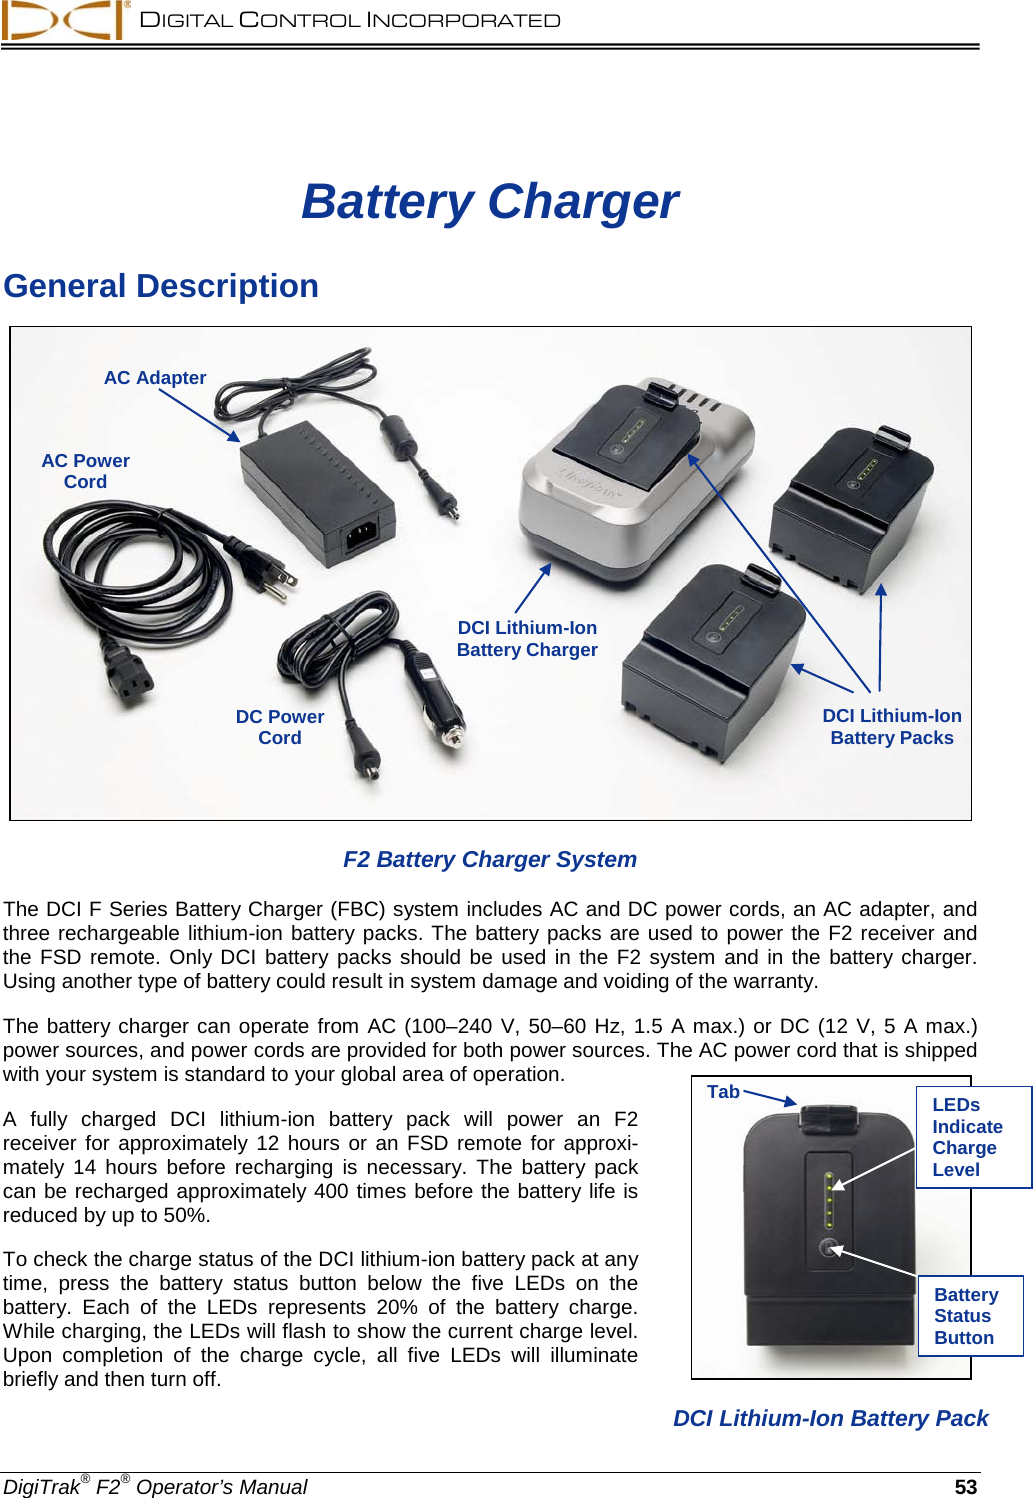  DIGITAL CONTROL INCORPORATED  DigiTrak® F2® Operator’s Manual 53 Battery Charger General Description  F2 Battery Charger System The DCI F Series Battery Charger (FBC) system includes AC and DC power cords, an AC adapter, and three rechargeable lithium-ion battery packs. The battery packs are used to power the F2 receiver and the FSD remote. Only DCI battery packs should be used in the F2 system and in the battery charger. Using another type of battery could result in system damage and voiding of the warranty.  The battery charger can operate from AC (100–240 V, 50–60 Hz, 1.5 A max.) or DC (12 V, 5 A max.) power sources, and power cords are provided for both power sources. The AC power cord that is shipped with your system is standard to your global area of operation. A fully charged DCI  lithium-ion battery pack will power an F2 receiver for approximately 12 hours or an FSD remote for approxi-mately 14 hours before recharging is necessary.  The battery pack can be recharged approximately 400 times before the battery life is reduced by up to 50%. To check the charge status of the DCI lithium-ion battery pack at any time, press the battery status button below the five LEDs on the battery.  Each of the LEDs represents 20% of the battery charge. While charging, the LEDs will flash to show the current charge level. Upon  completion of the charge cycle, all five LEDs will illuminate briefly and then turn off.  AC Adapter AC Power Cord DCI Lithium-Ion Battery Charger DCI Lithium-Ion Battery Packs  DC Power Cord   DCI Lithium-Ion Battery Pack Tab LEDs Indicate Charge Level Battery Status Button 